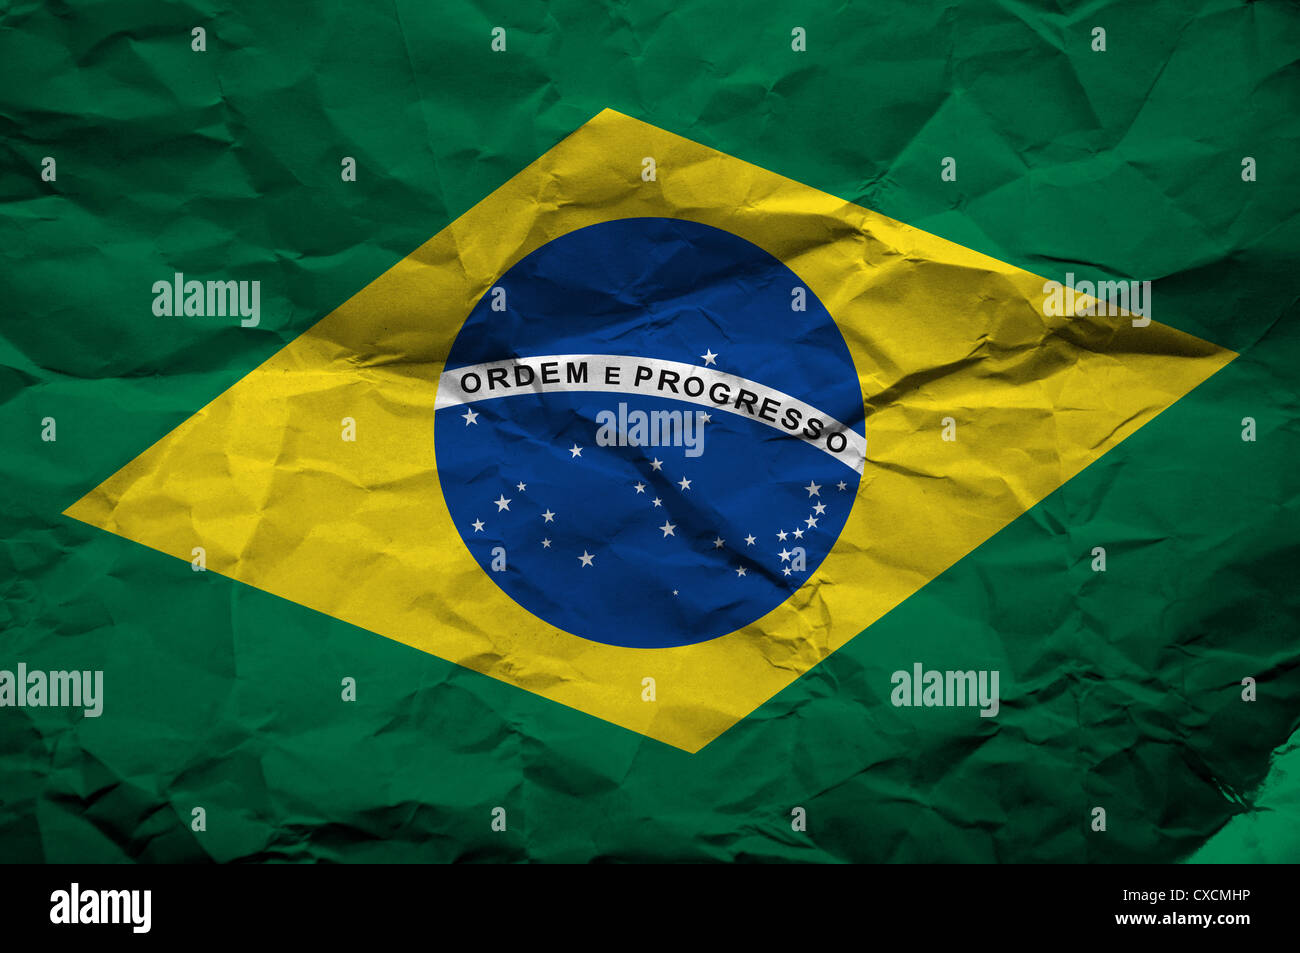 Grunge flag of Brasil, illustration is overlaying a grungy texture Stock Photo